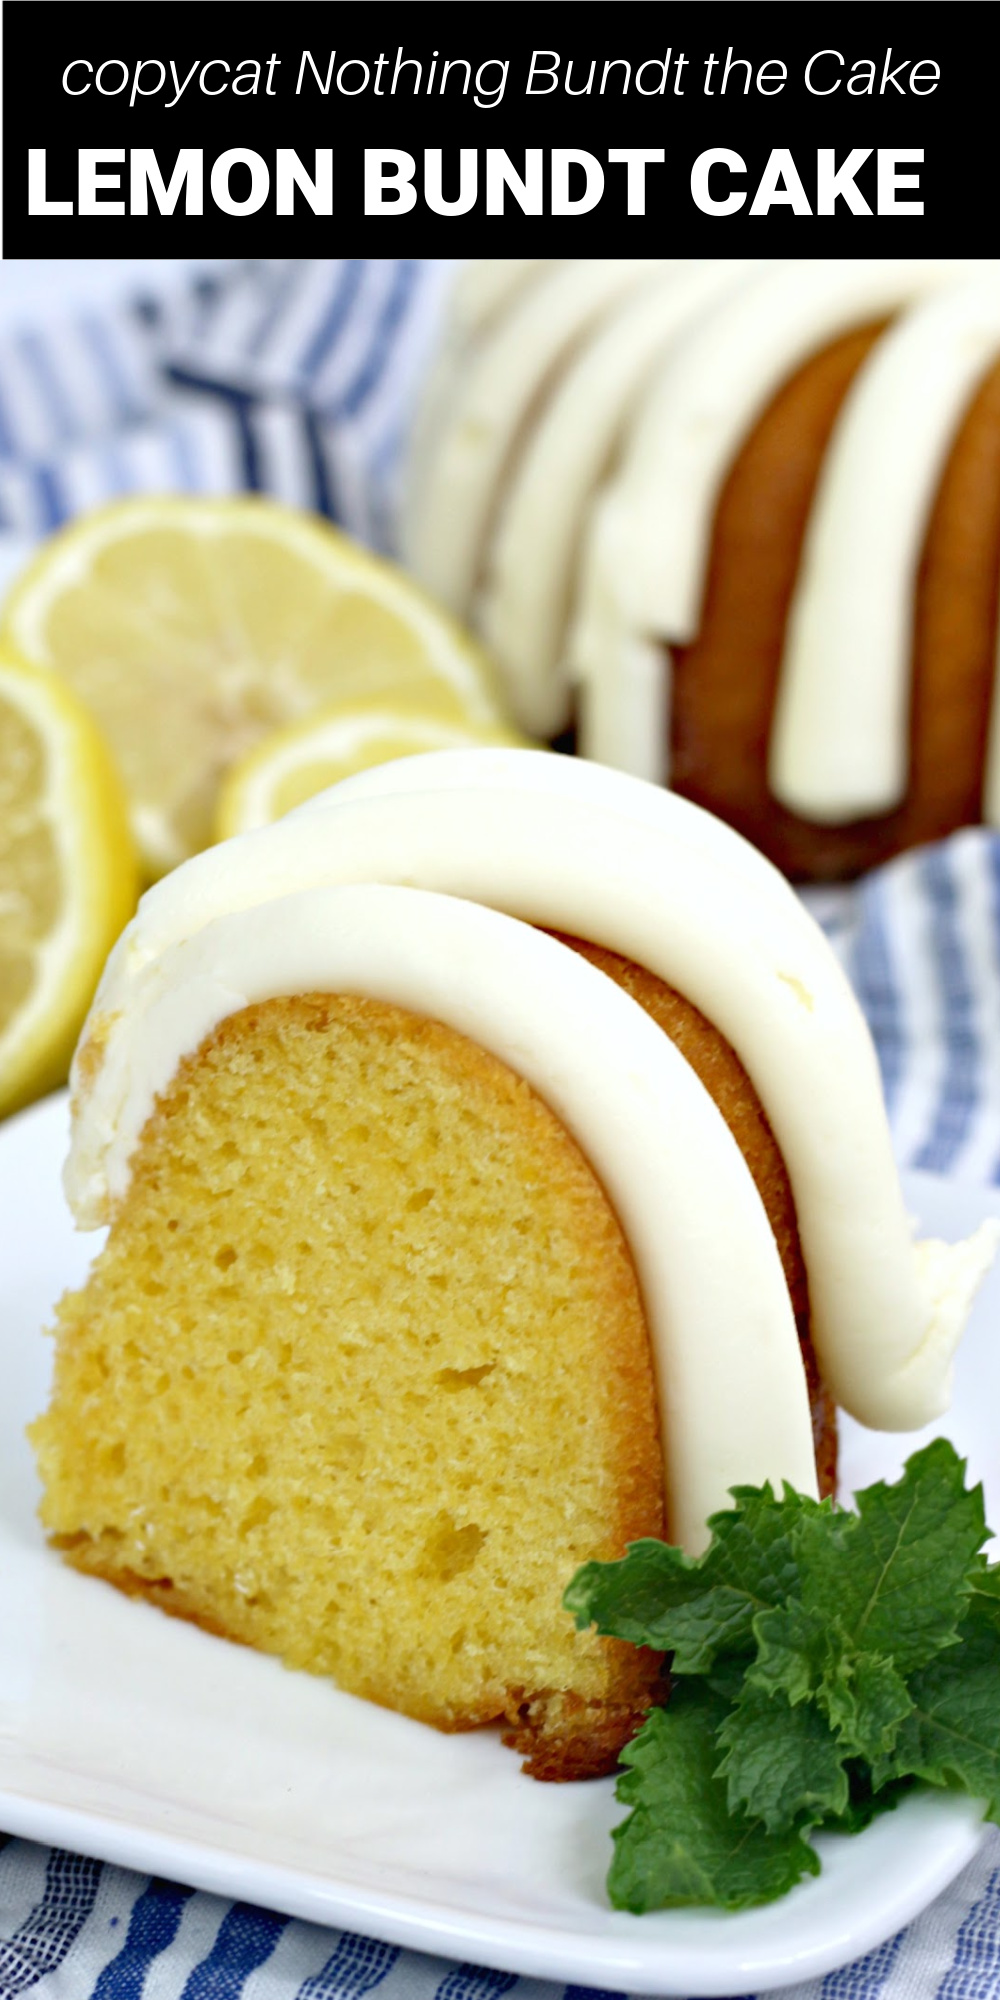 This Copycat Nothing Bundt Cake Lemon Bundt Cake recipe is so good, you won’t know the difference from the real thing!